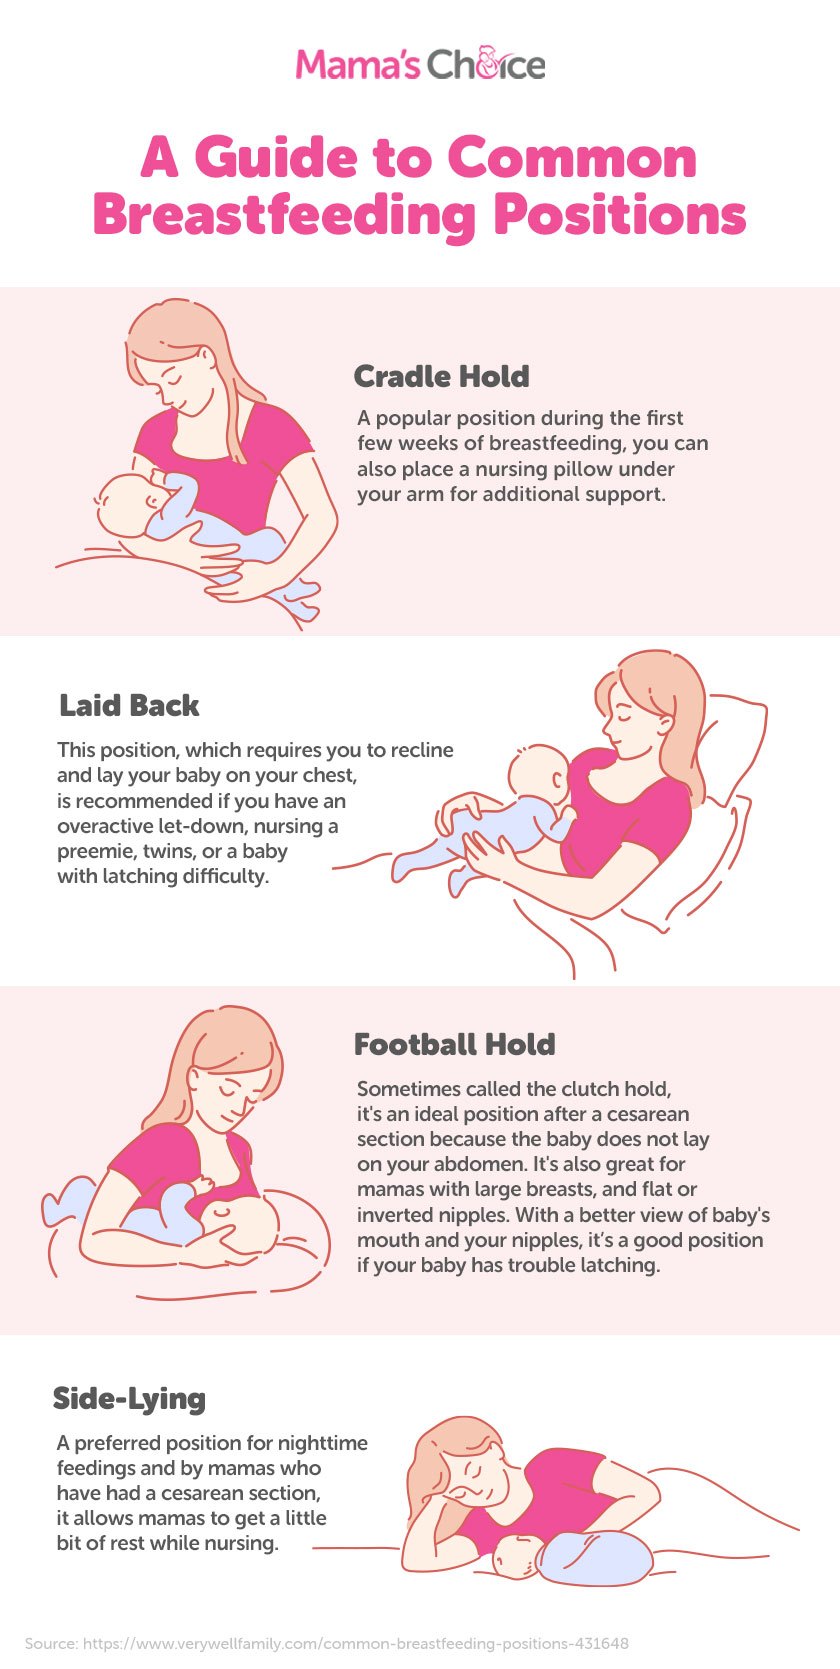 Breastfeeding positions infographic